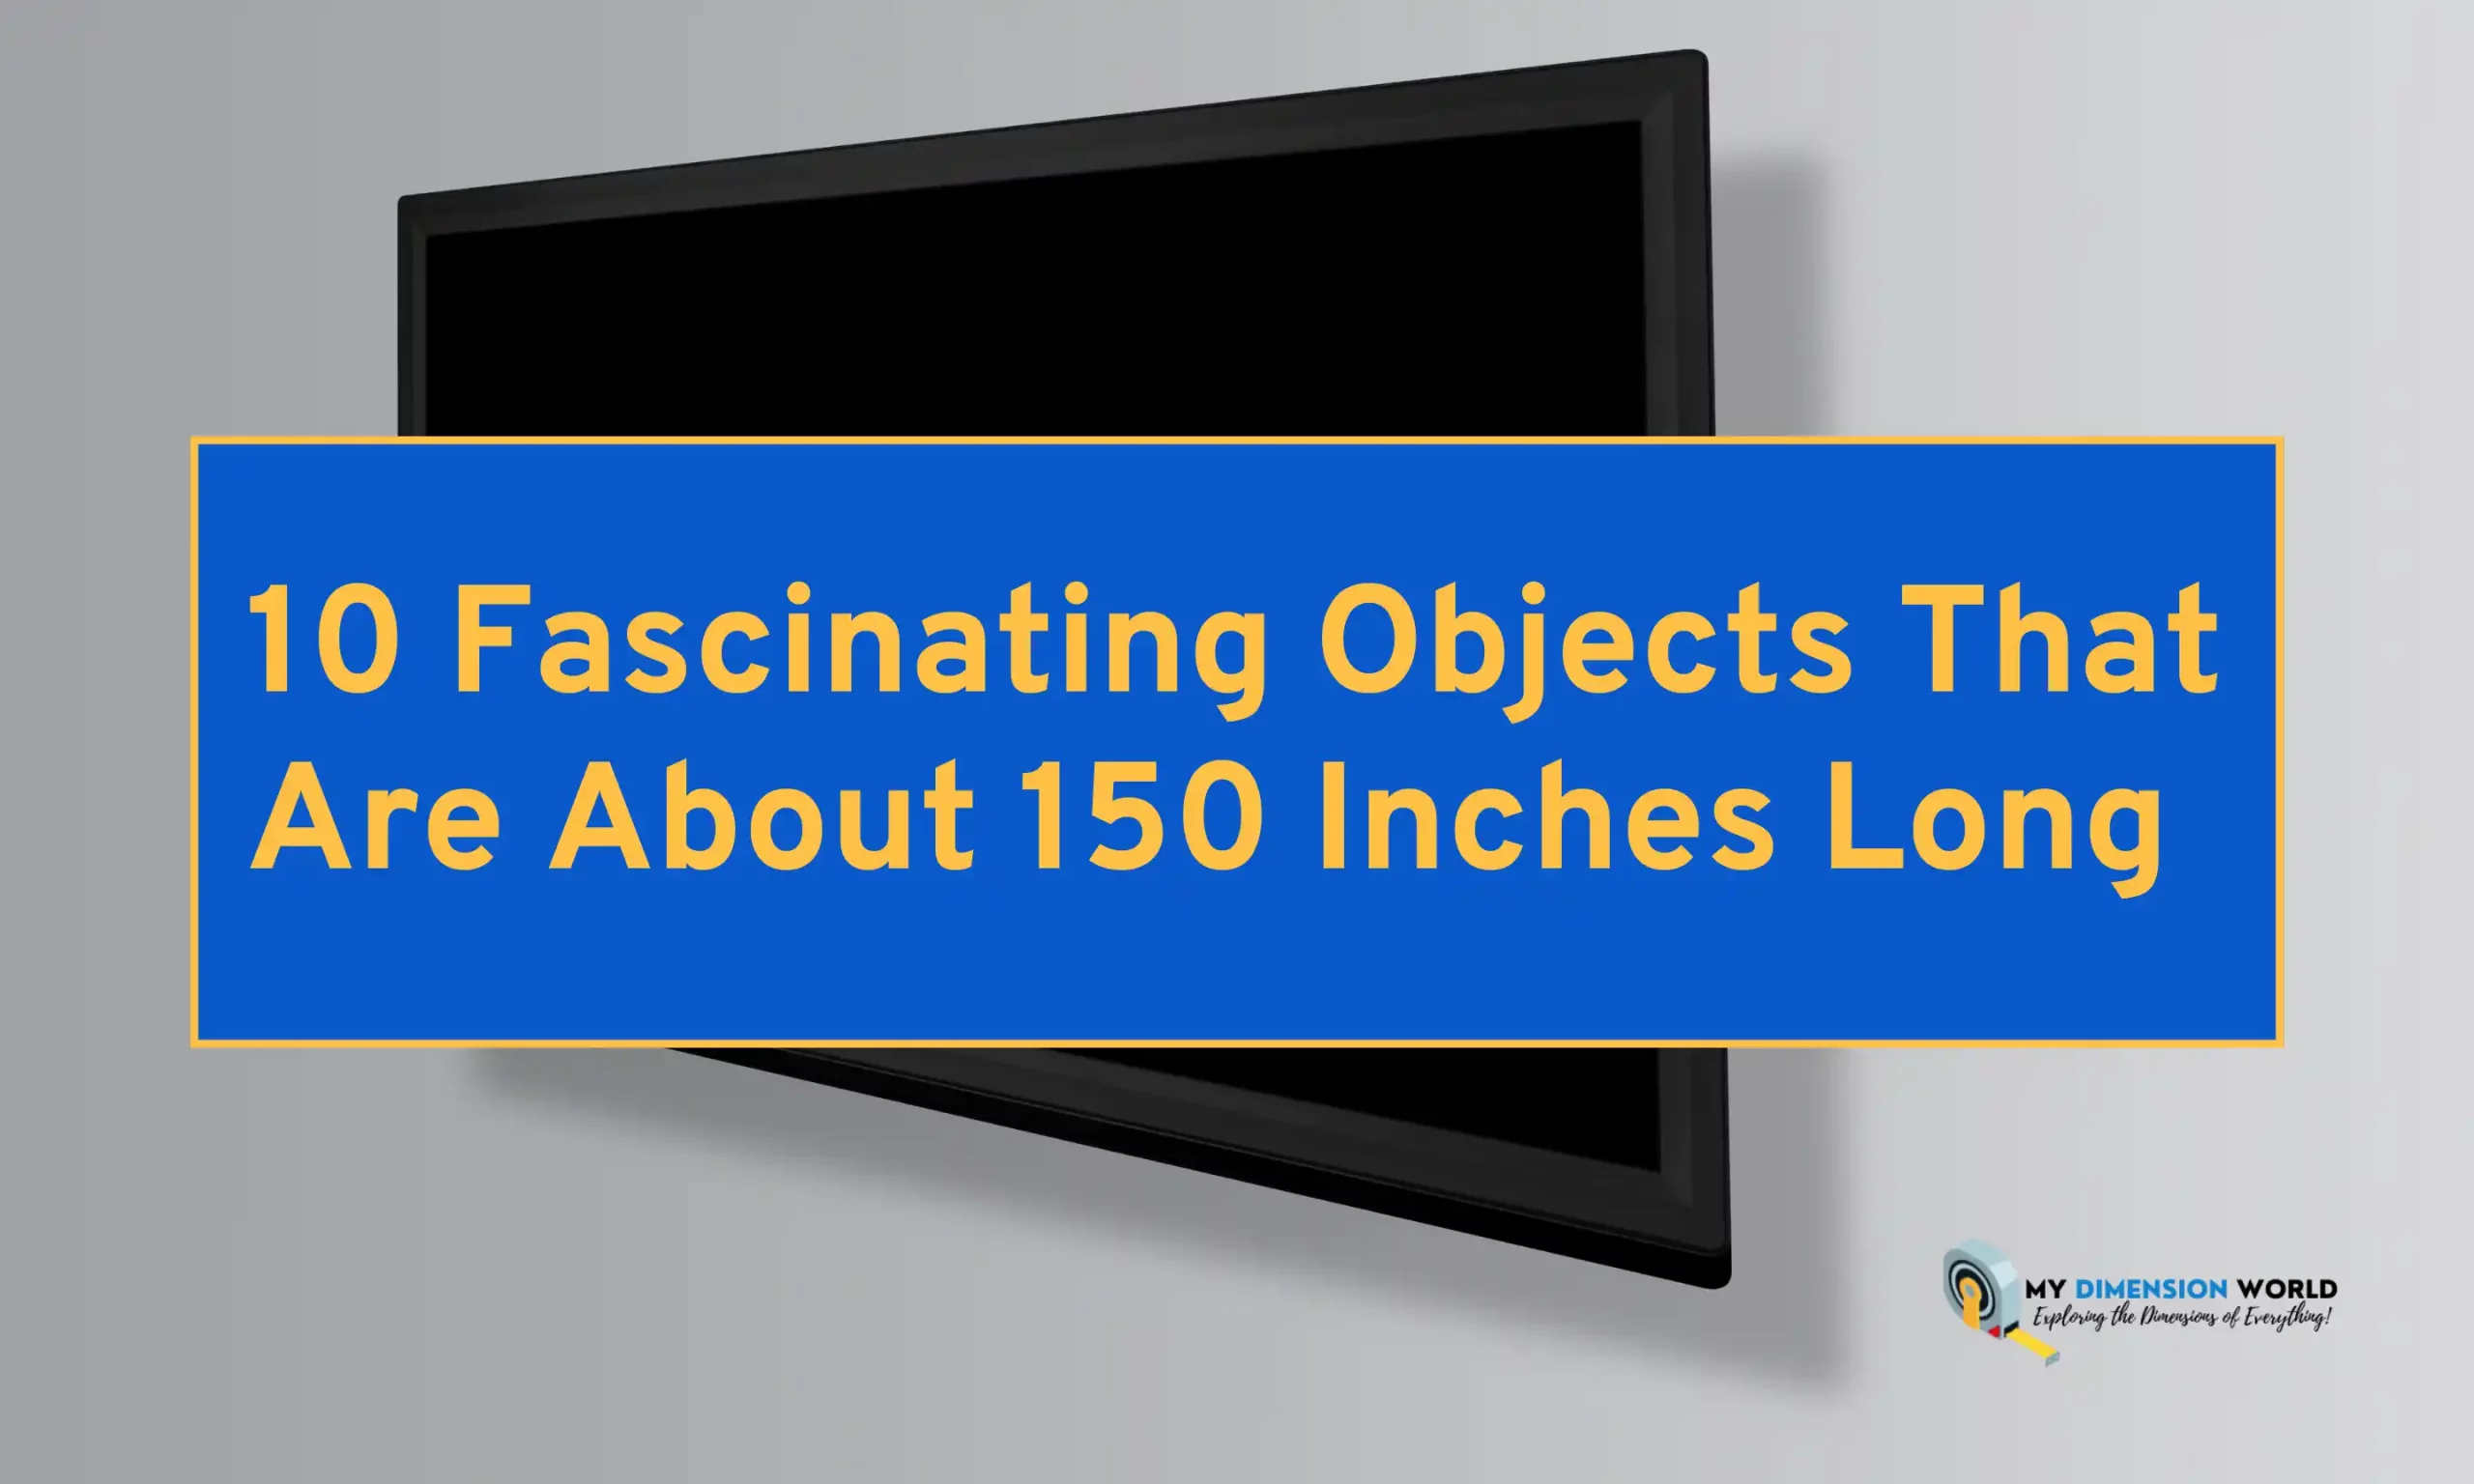 10 Fascinating Objects That Are About 150 Inches Long